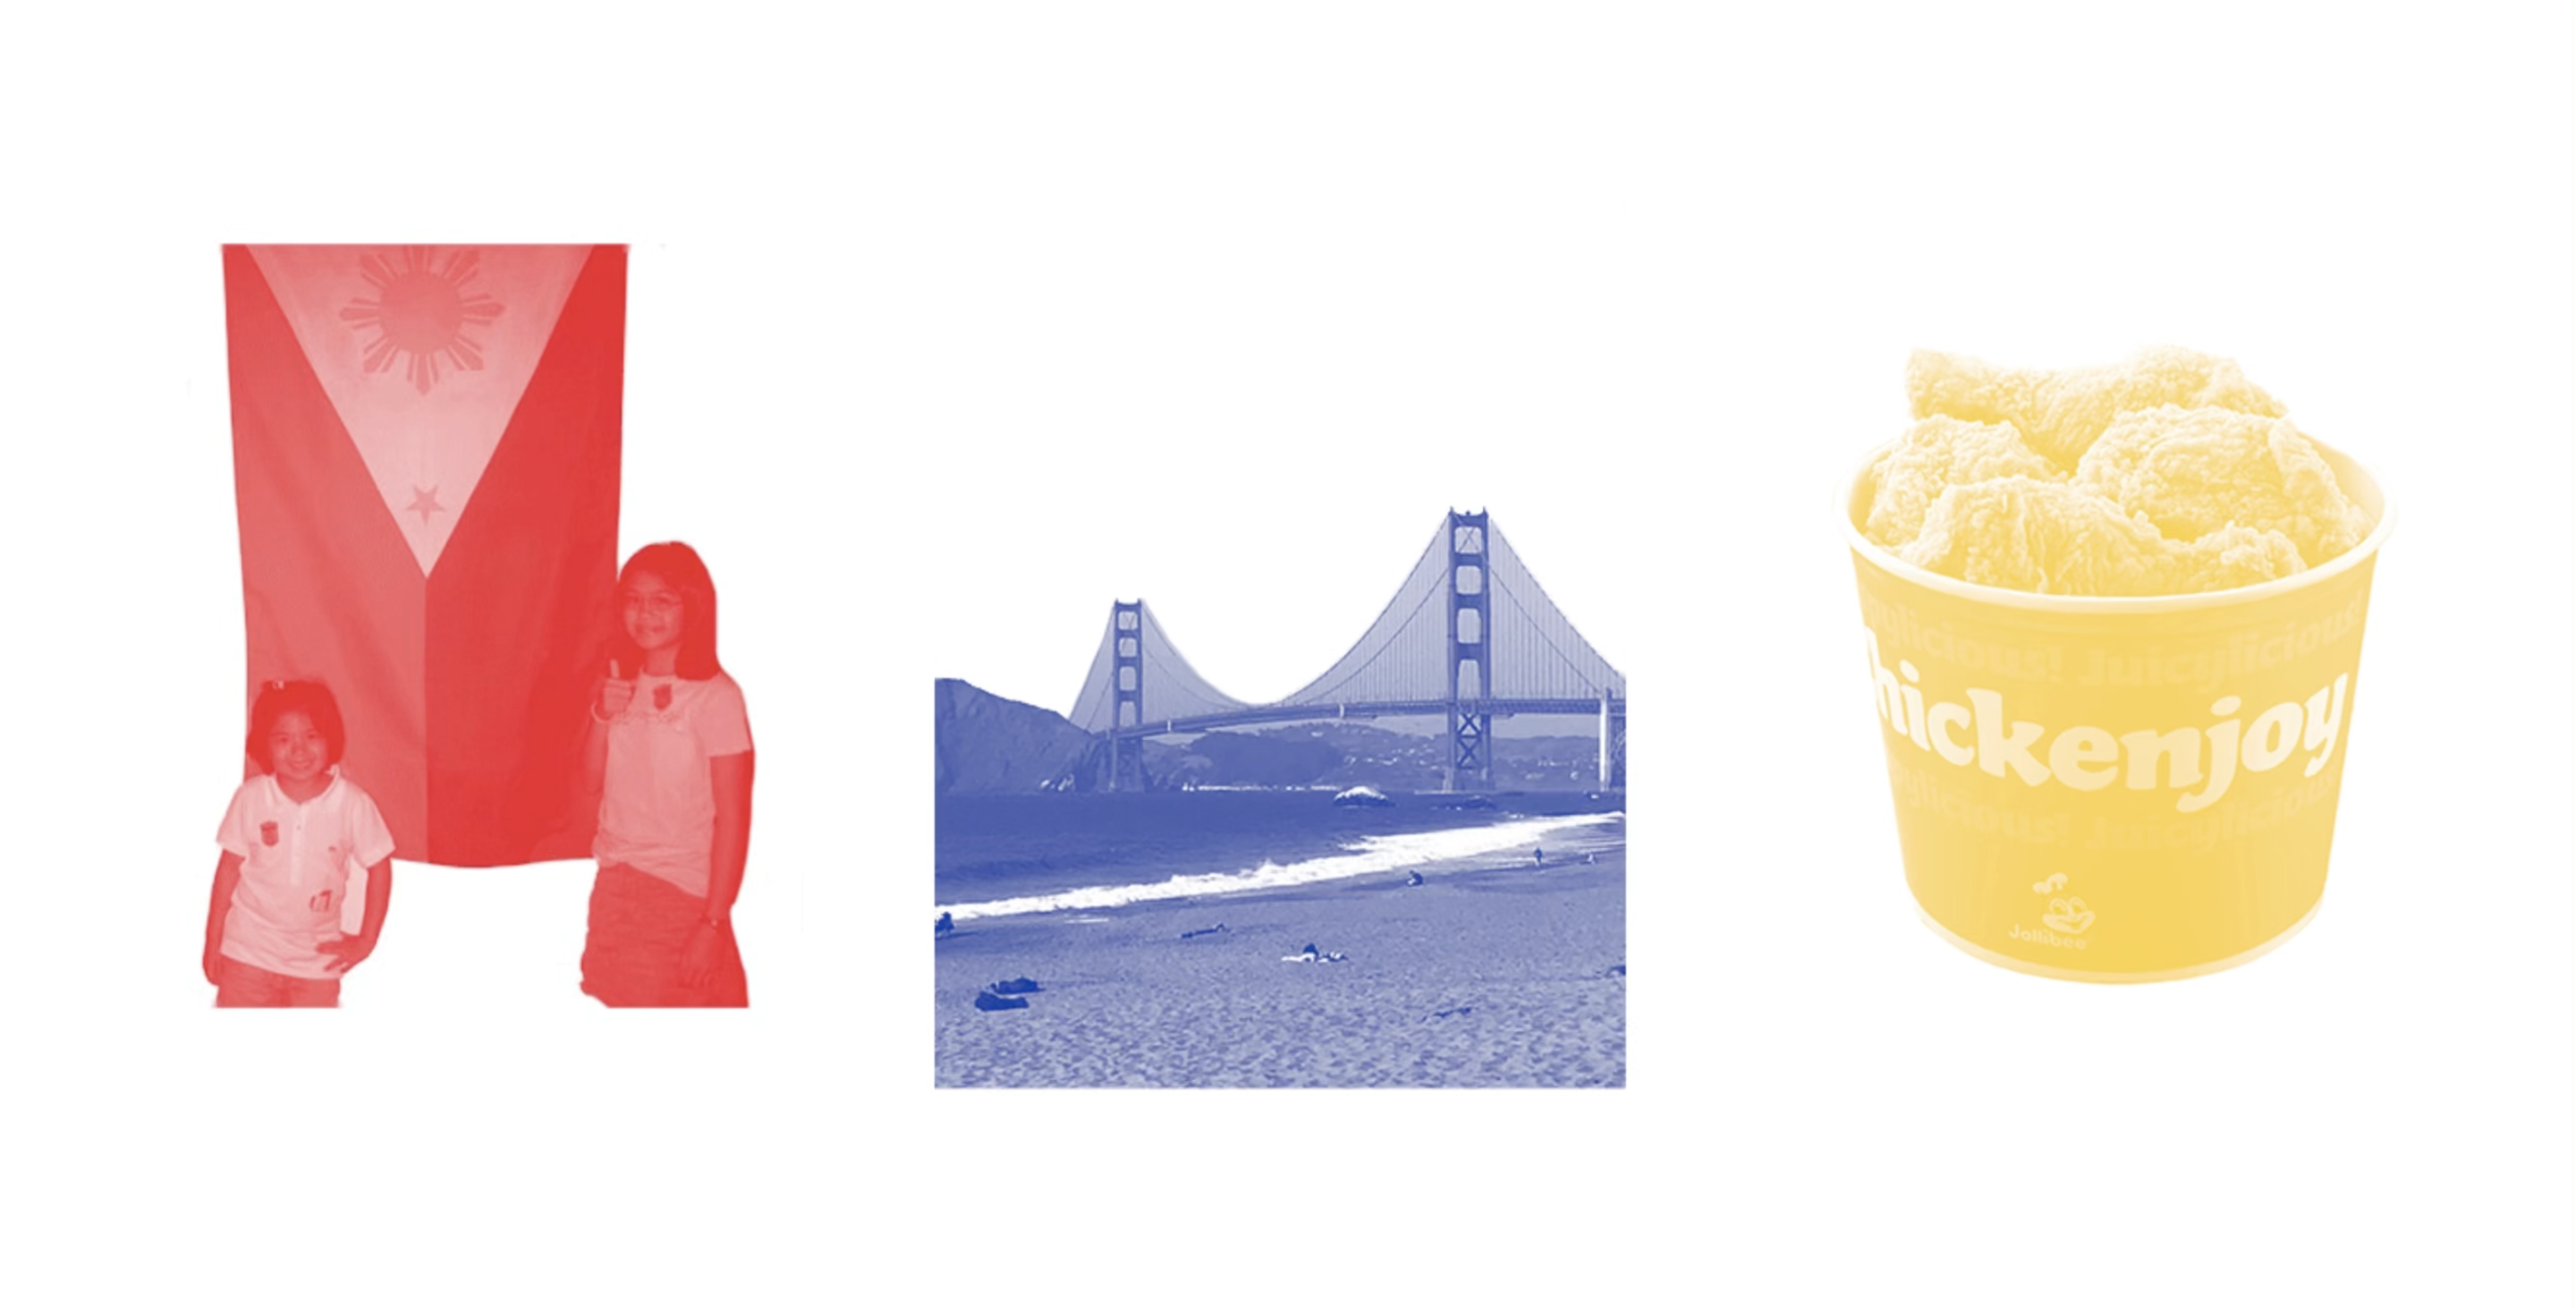 A screenshot of a red, blue, and yellow GIF displaying two girls, the Golden Gate Bridge, and a bucket of chicken.